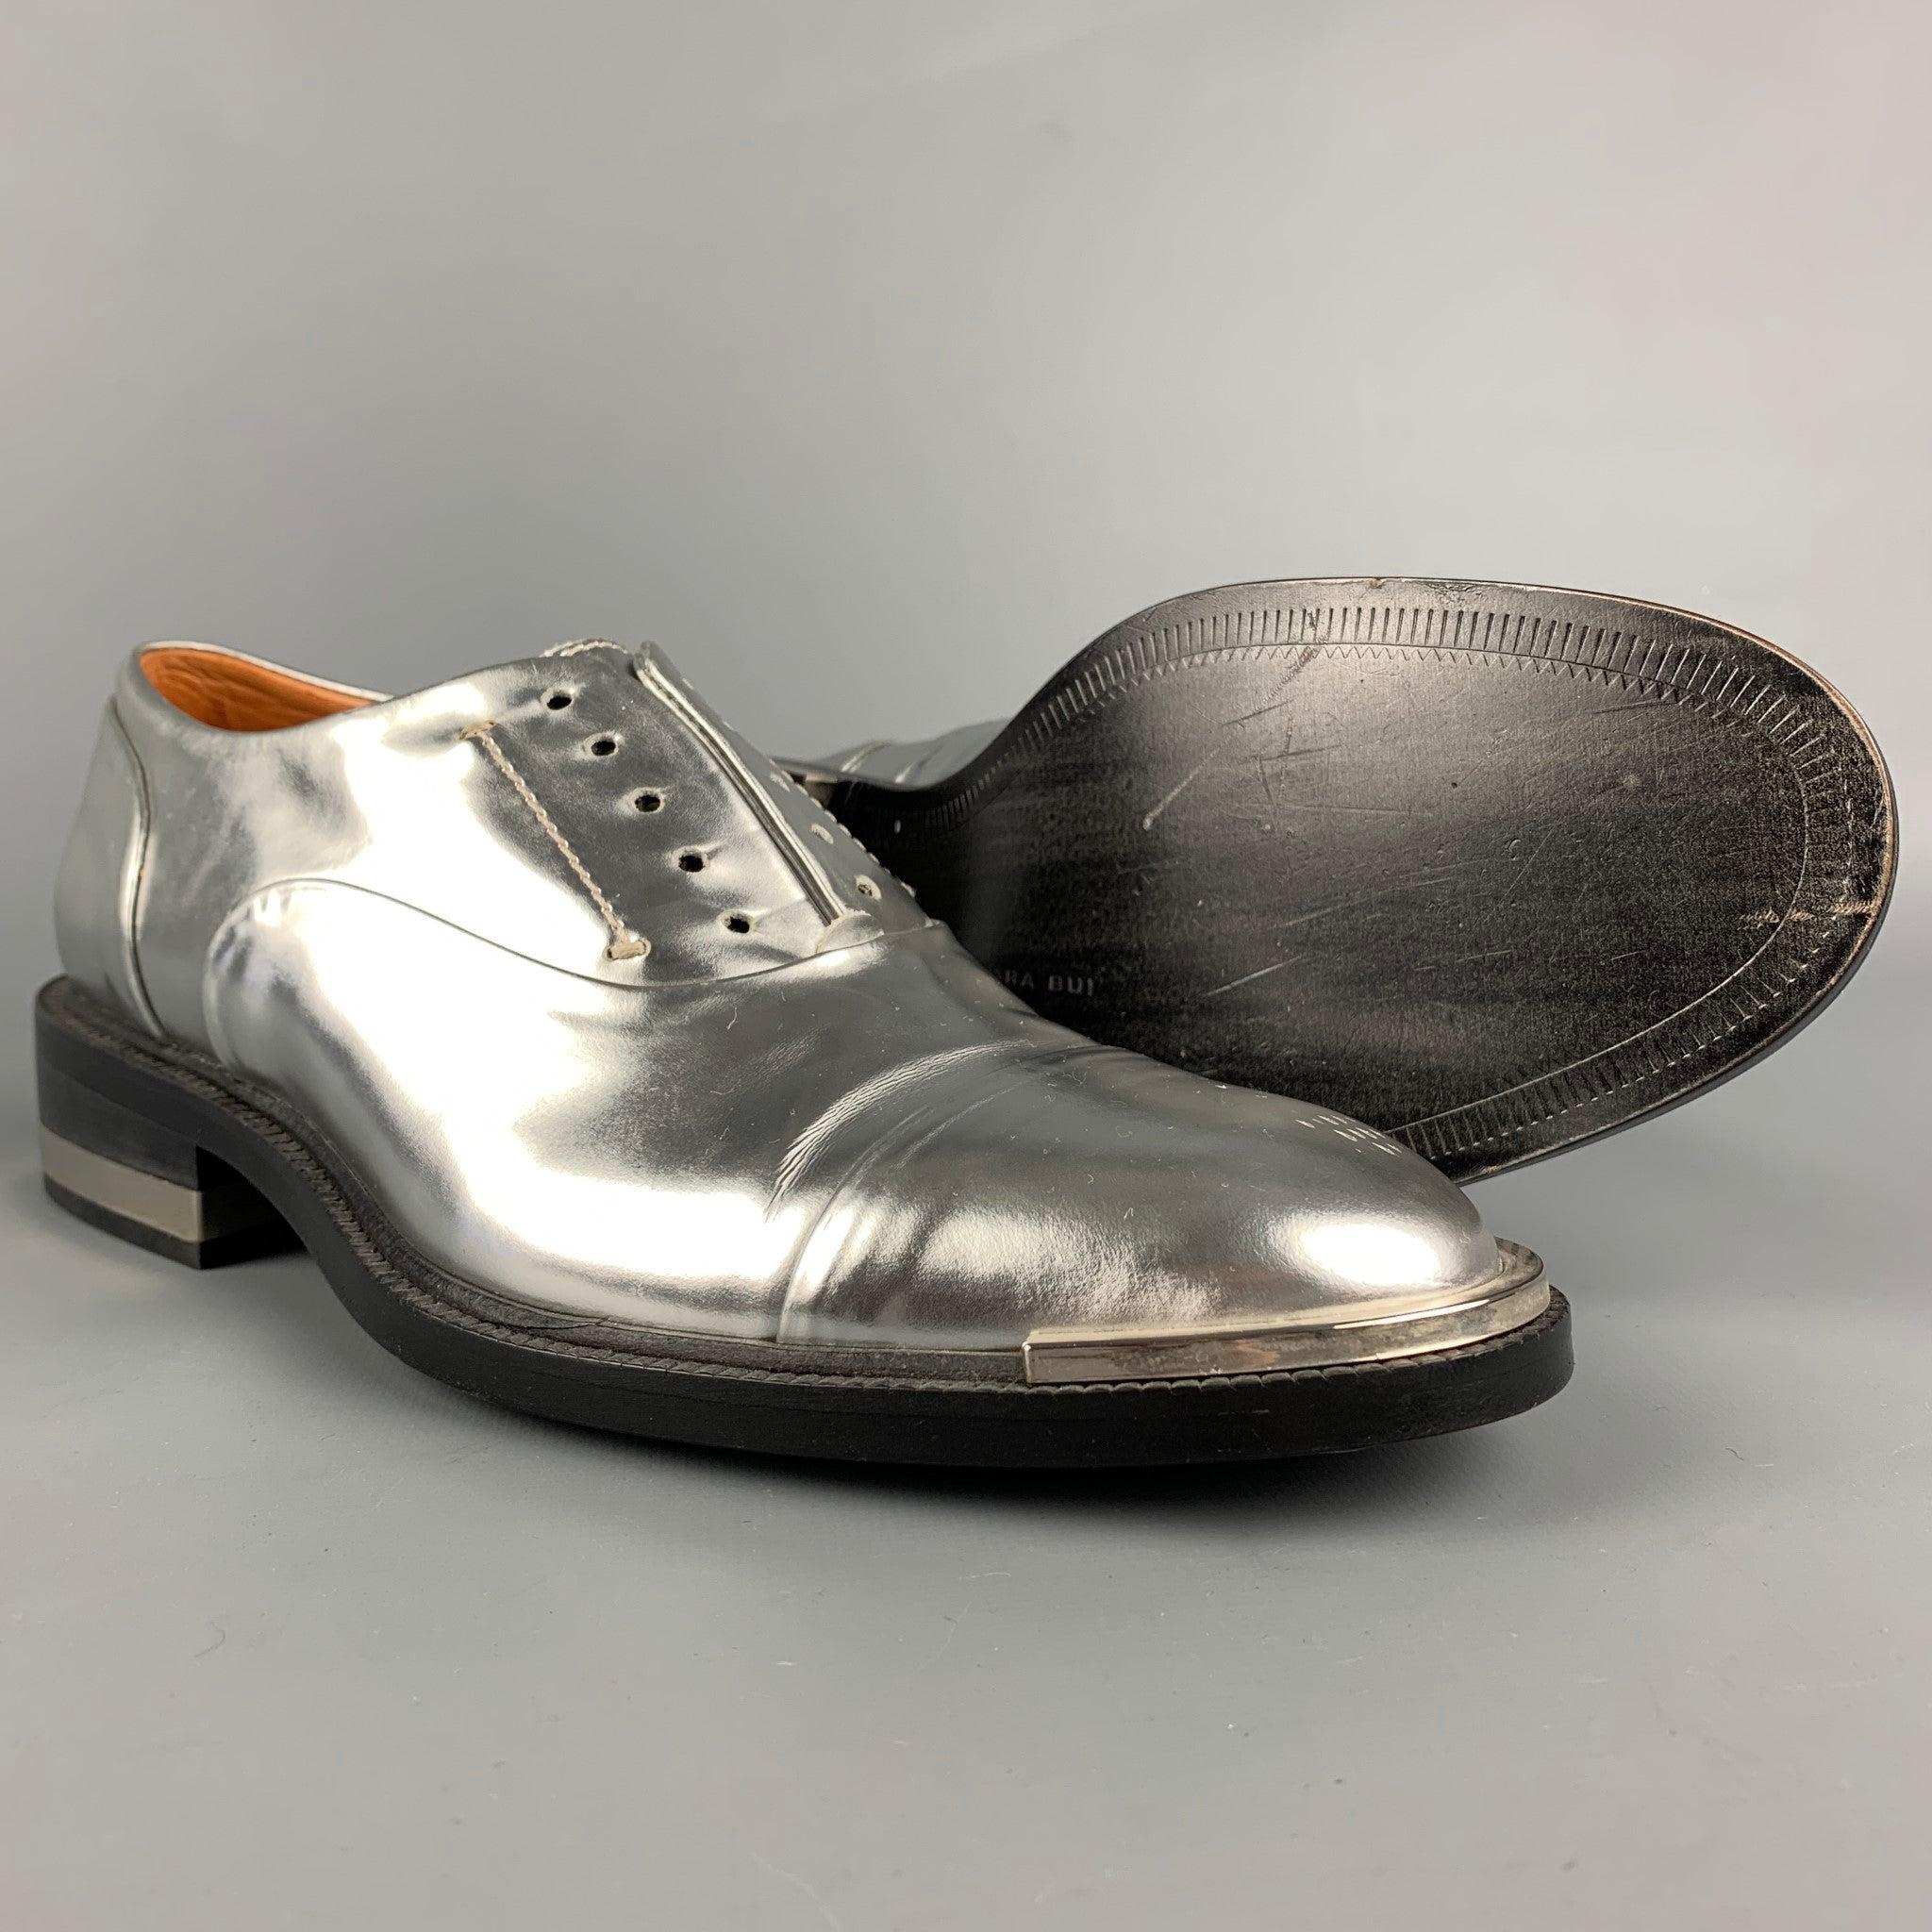 BARBARA BUI Size 7 Silver Leather Metallic Patent Leather Shoes In Good Condition For Sale In San Francisco, CA